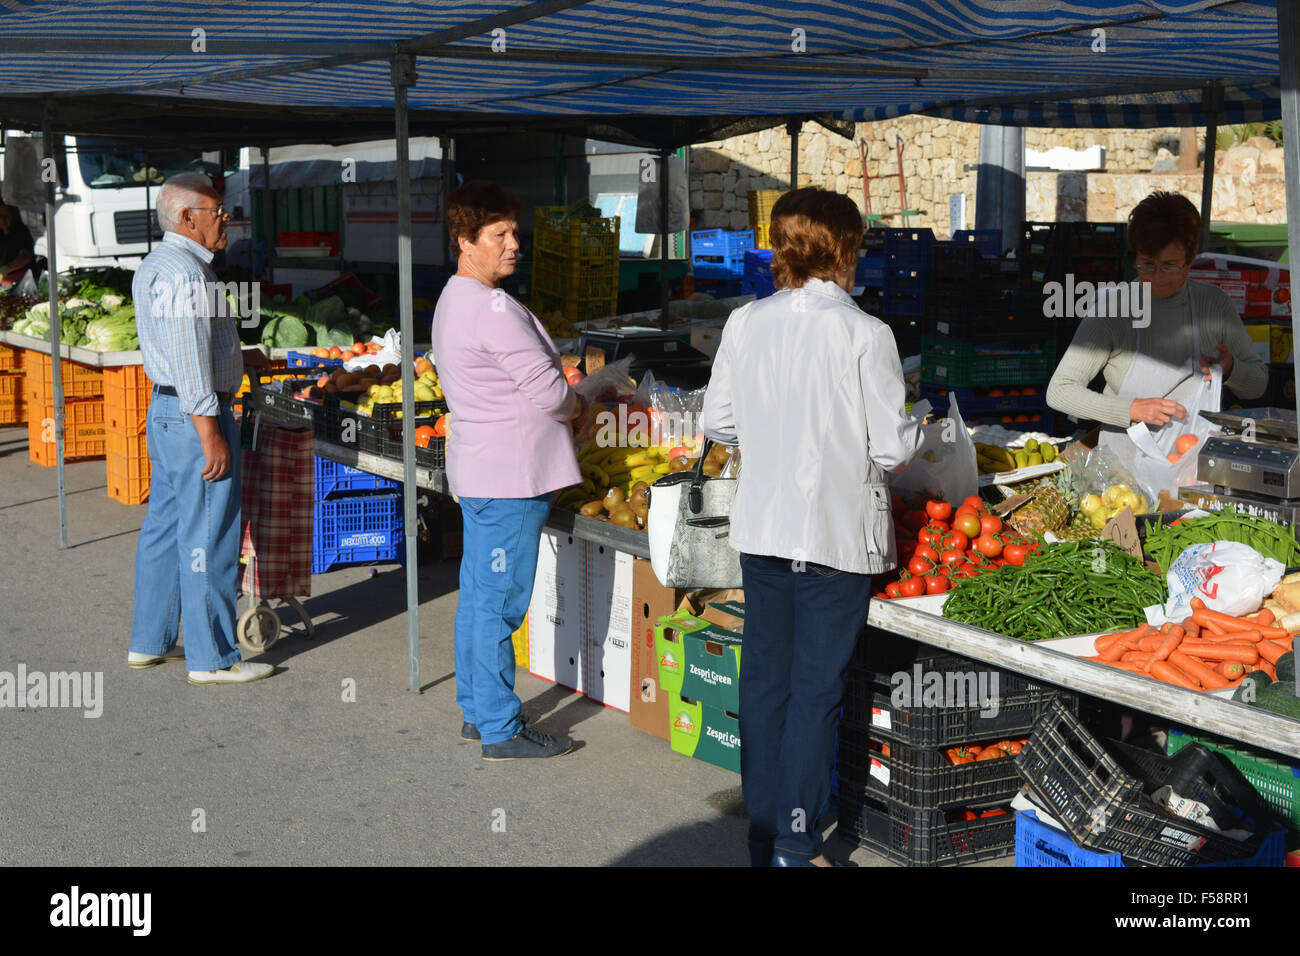 The weekly Thursday Market in Javea, Spain.  Stalls selling fresh fruit and vegetables. Stock Photo